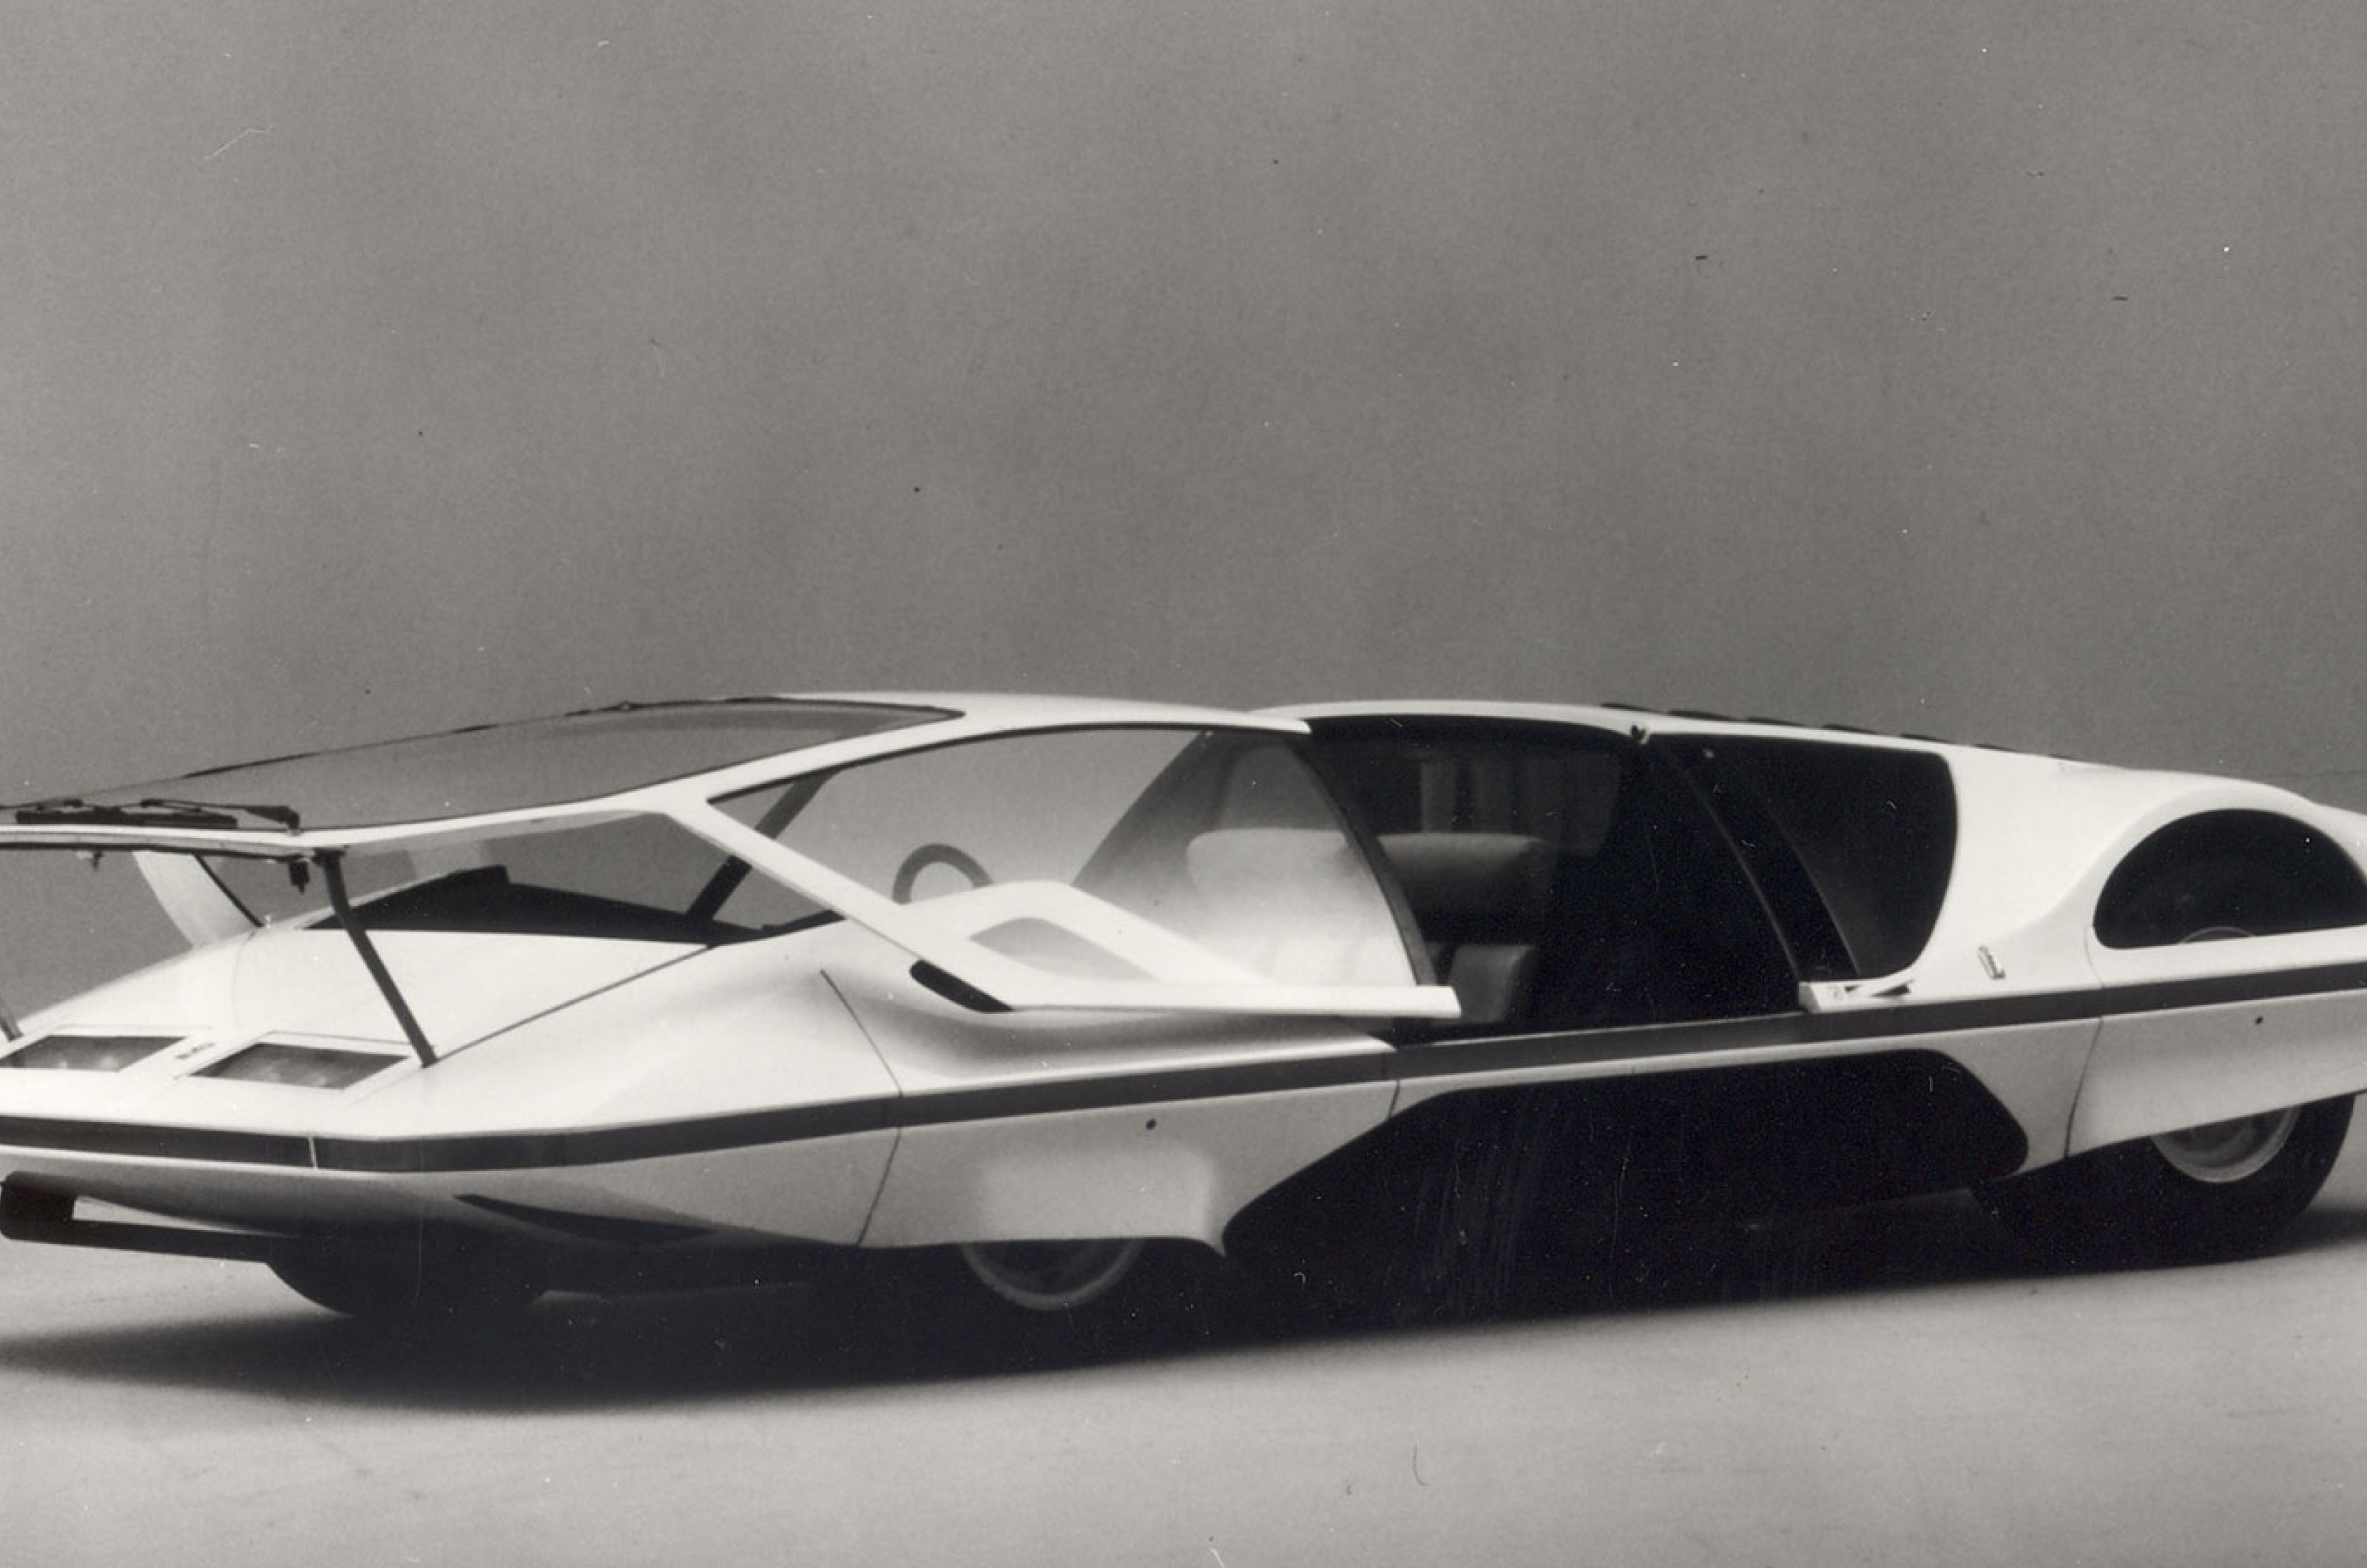 <p>Pininfarina’s take on the wedge design needed an innovative solution to access the vehicle without disrupting its stark lines. Instead of constructing gullwings or butterfly doors, the obvious decision was to create an entire cockpit cover that slid forward on two supports.</p>  <p>As a mid-engined supercar concept, there was enough room in the front to accommodate this contraption and no risk of excess heat warping the panels.</p>  <p>But there wasn’t any risk of this anyway, because its c550HP 5-liter V12 engine never ran – that is, until recently.</p>  <p>The American movie producer James Glickenhaus bought the concept car in 2014, and had it restored and put on the road.</p>  <p>Although he had a small fire when driving it in 2019, it has, apparently, been fixed and is back to its former glory.</p>